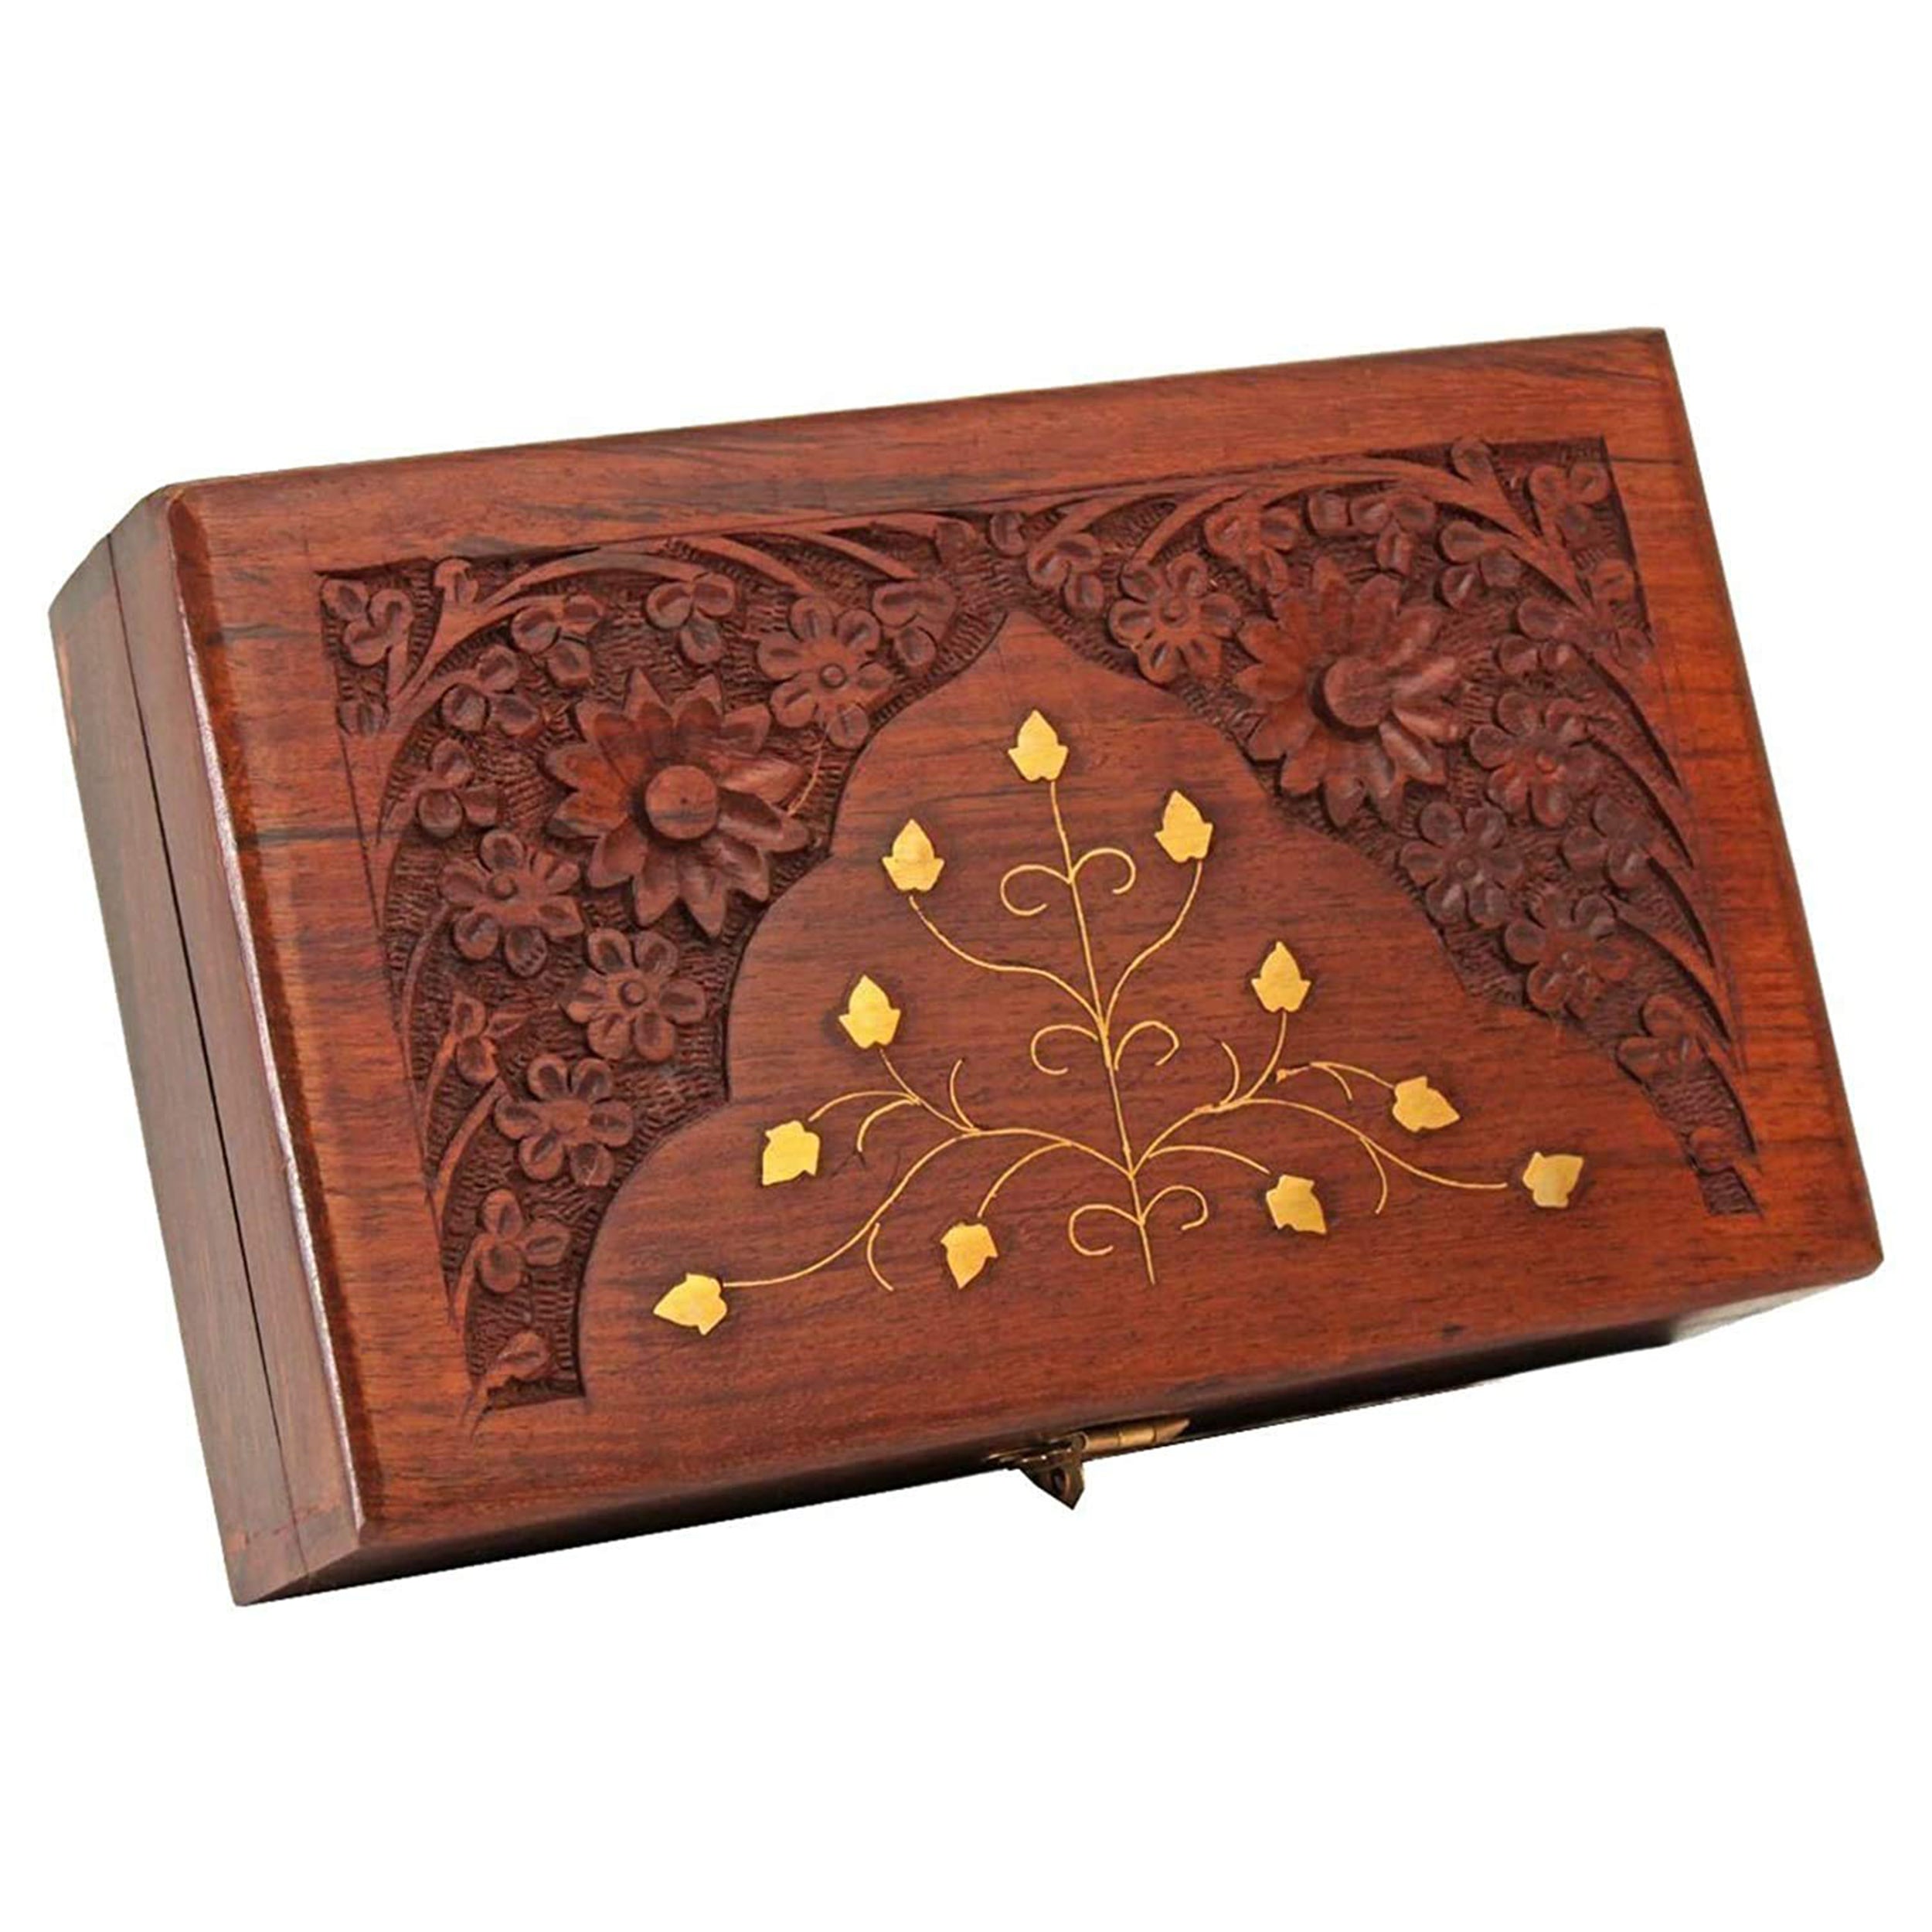 Handcrafted Wooden Decorated Brass-Filled Box - Perfect for Storing Your Valuables